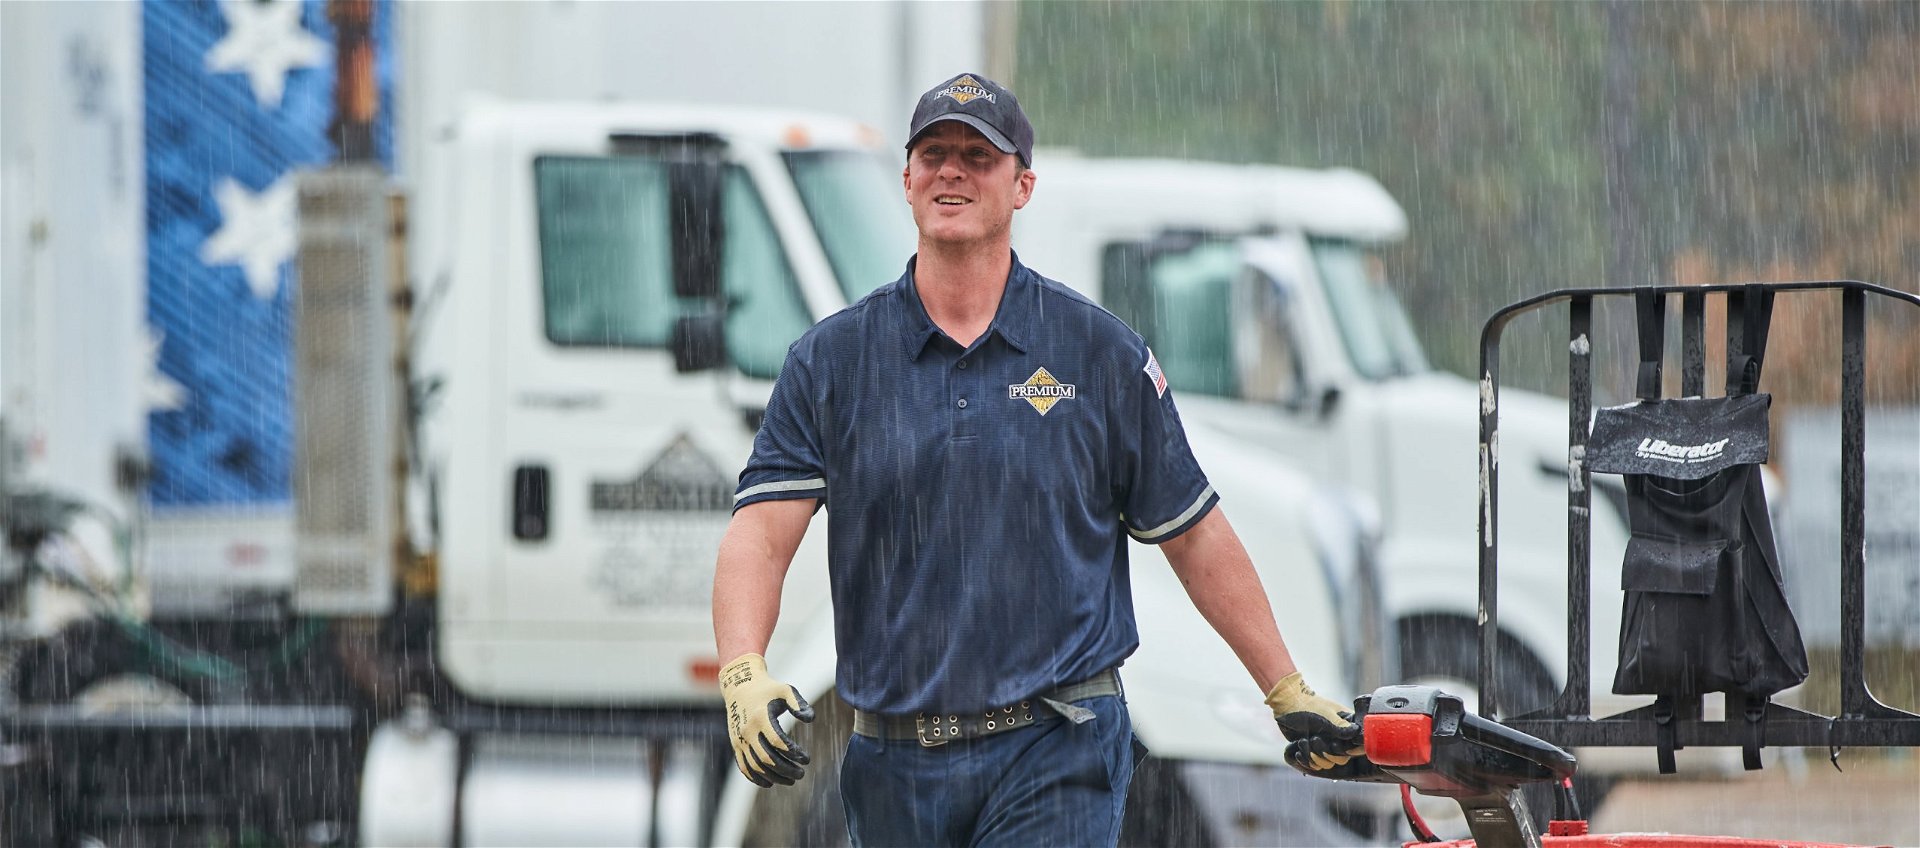 A man wearing a navy hat and polo shirt smiling while walking outside in the rain